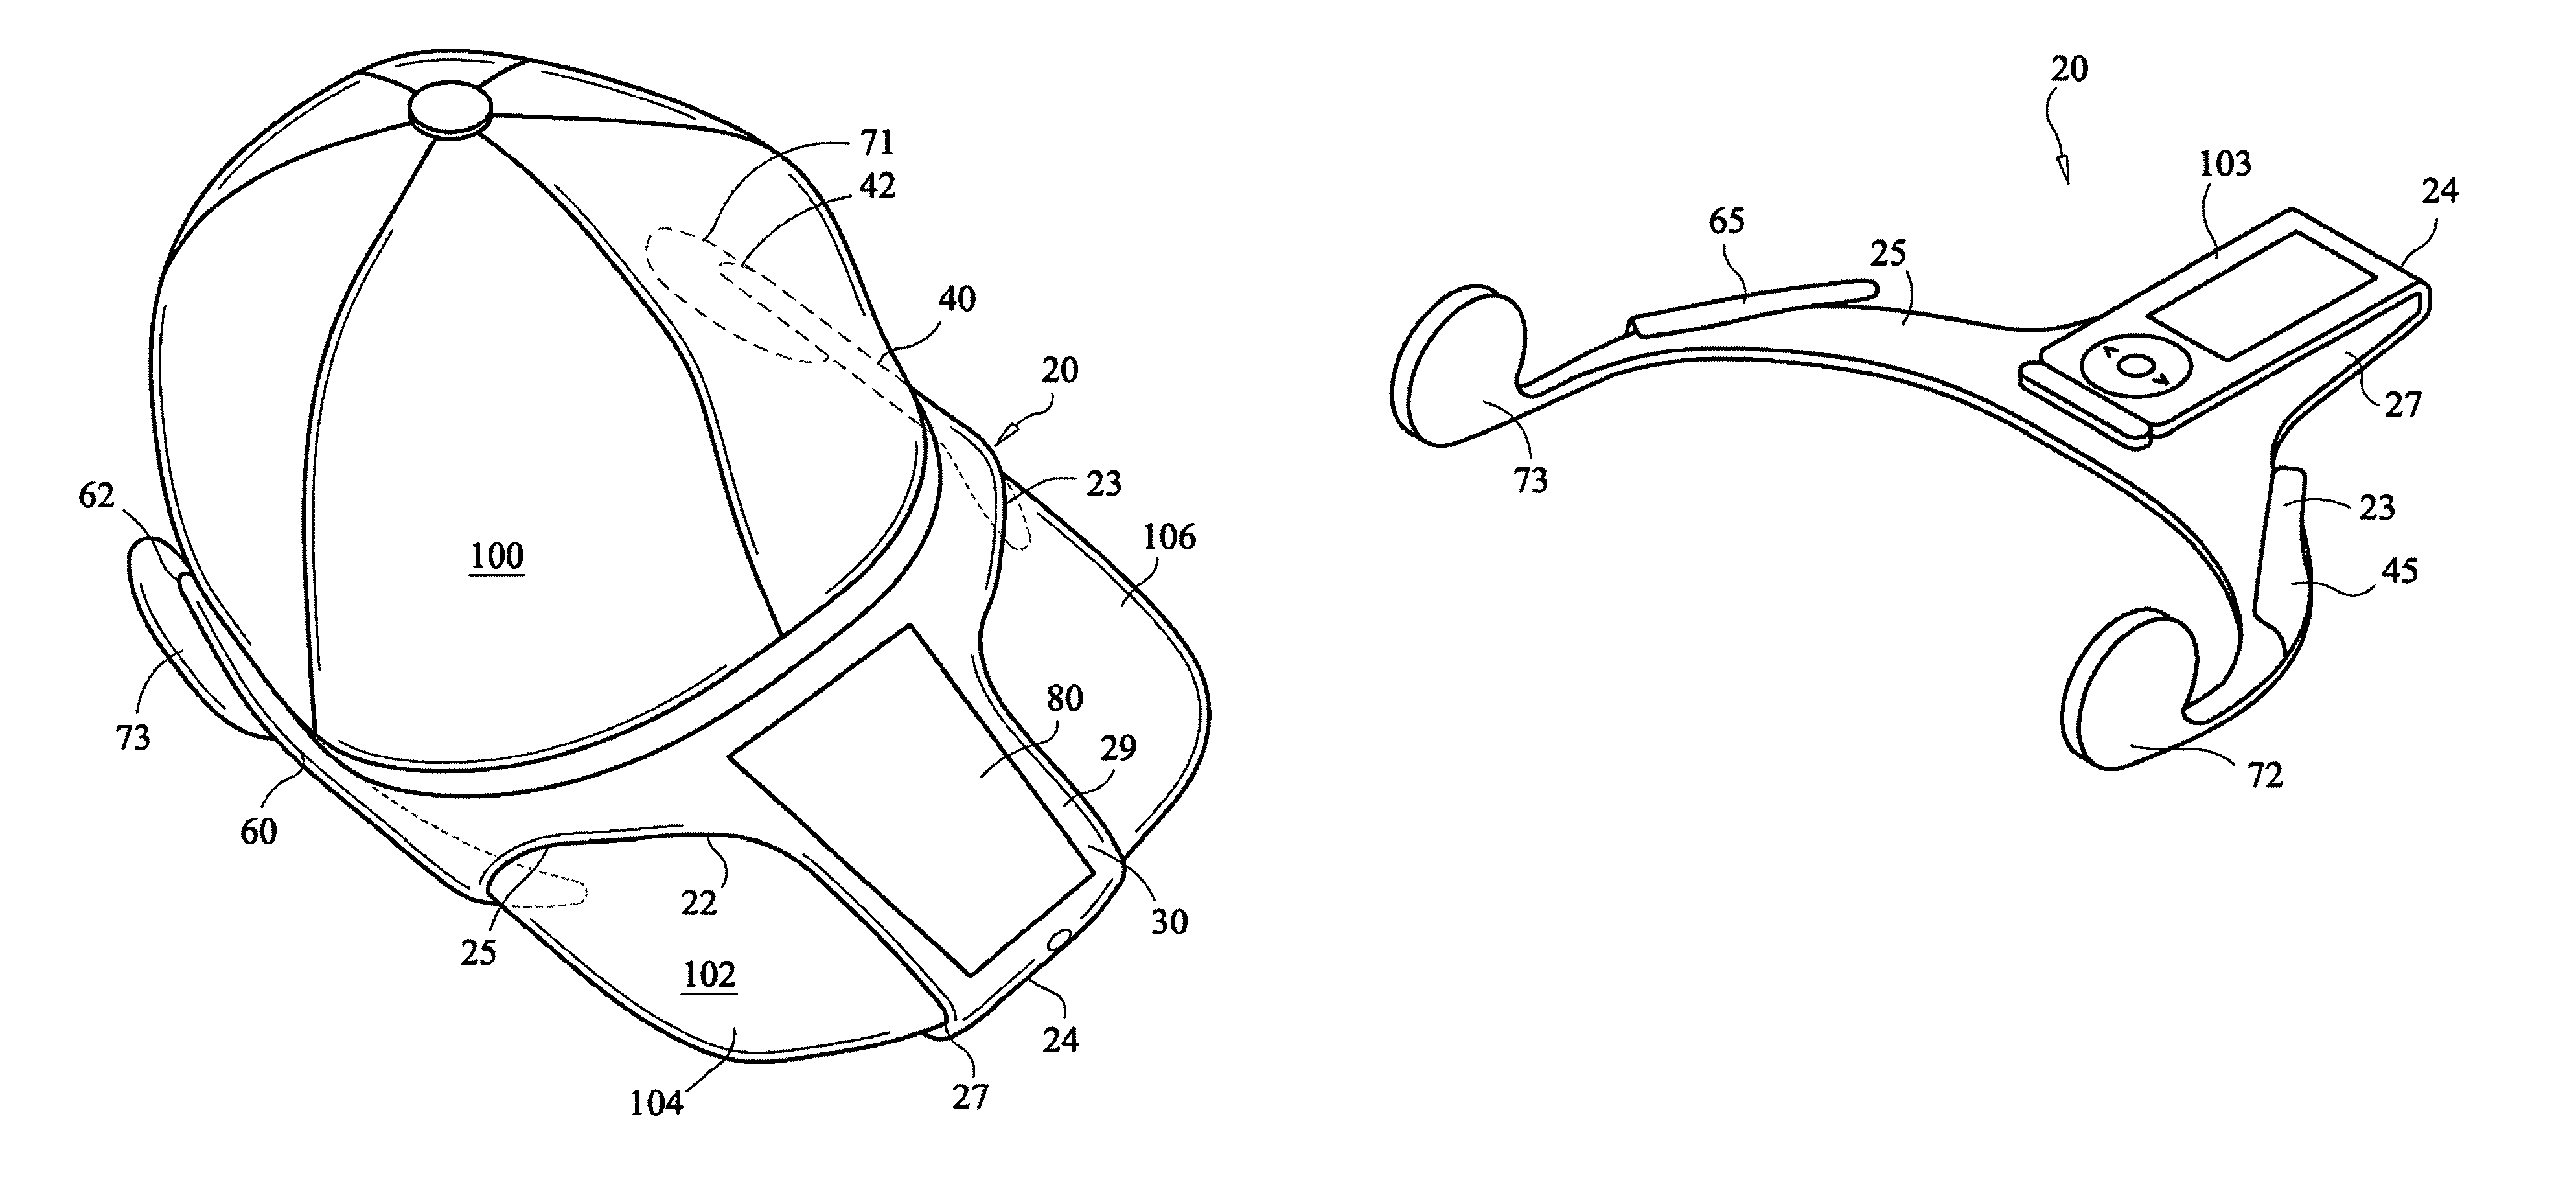 Removable hat attaching device for housing an electronic device